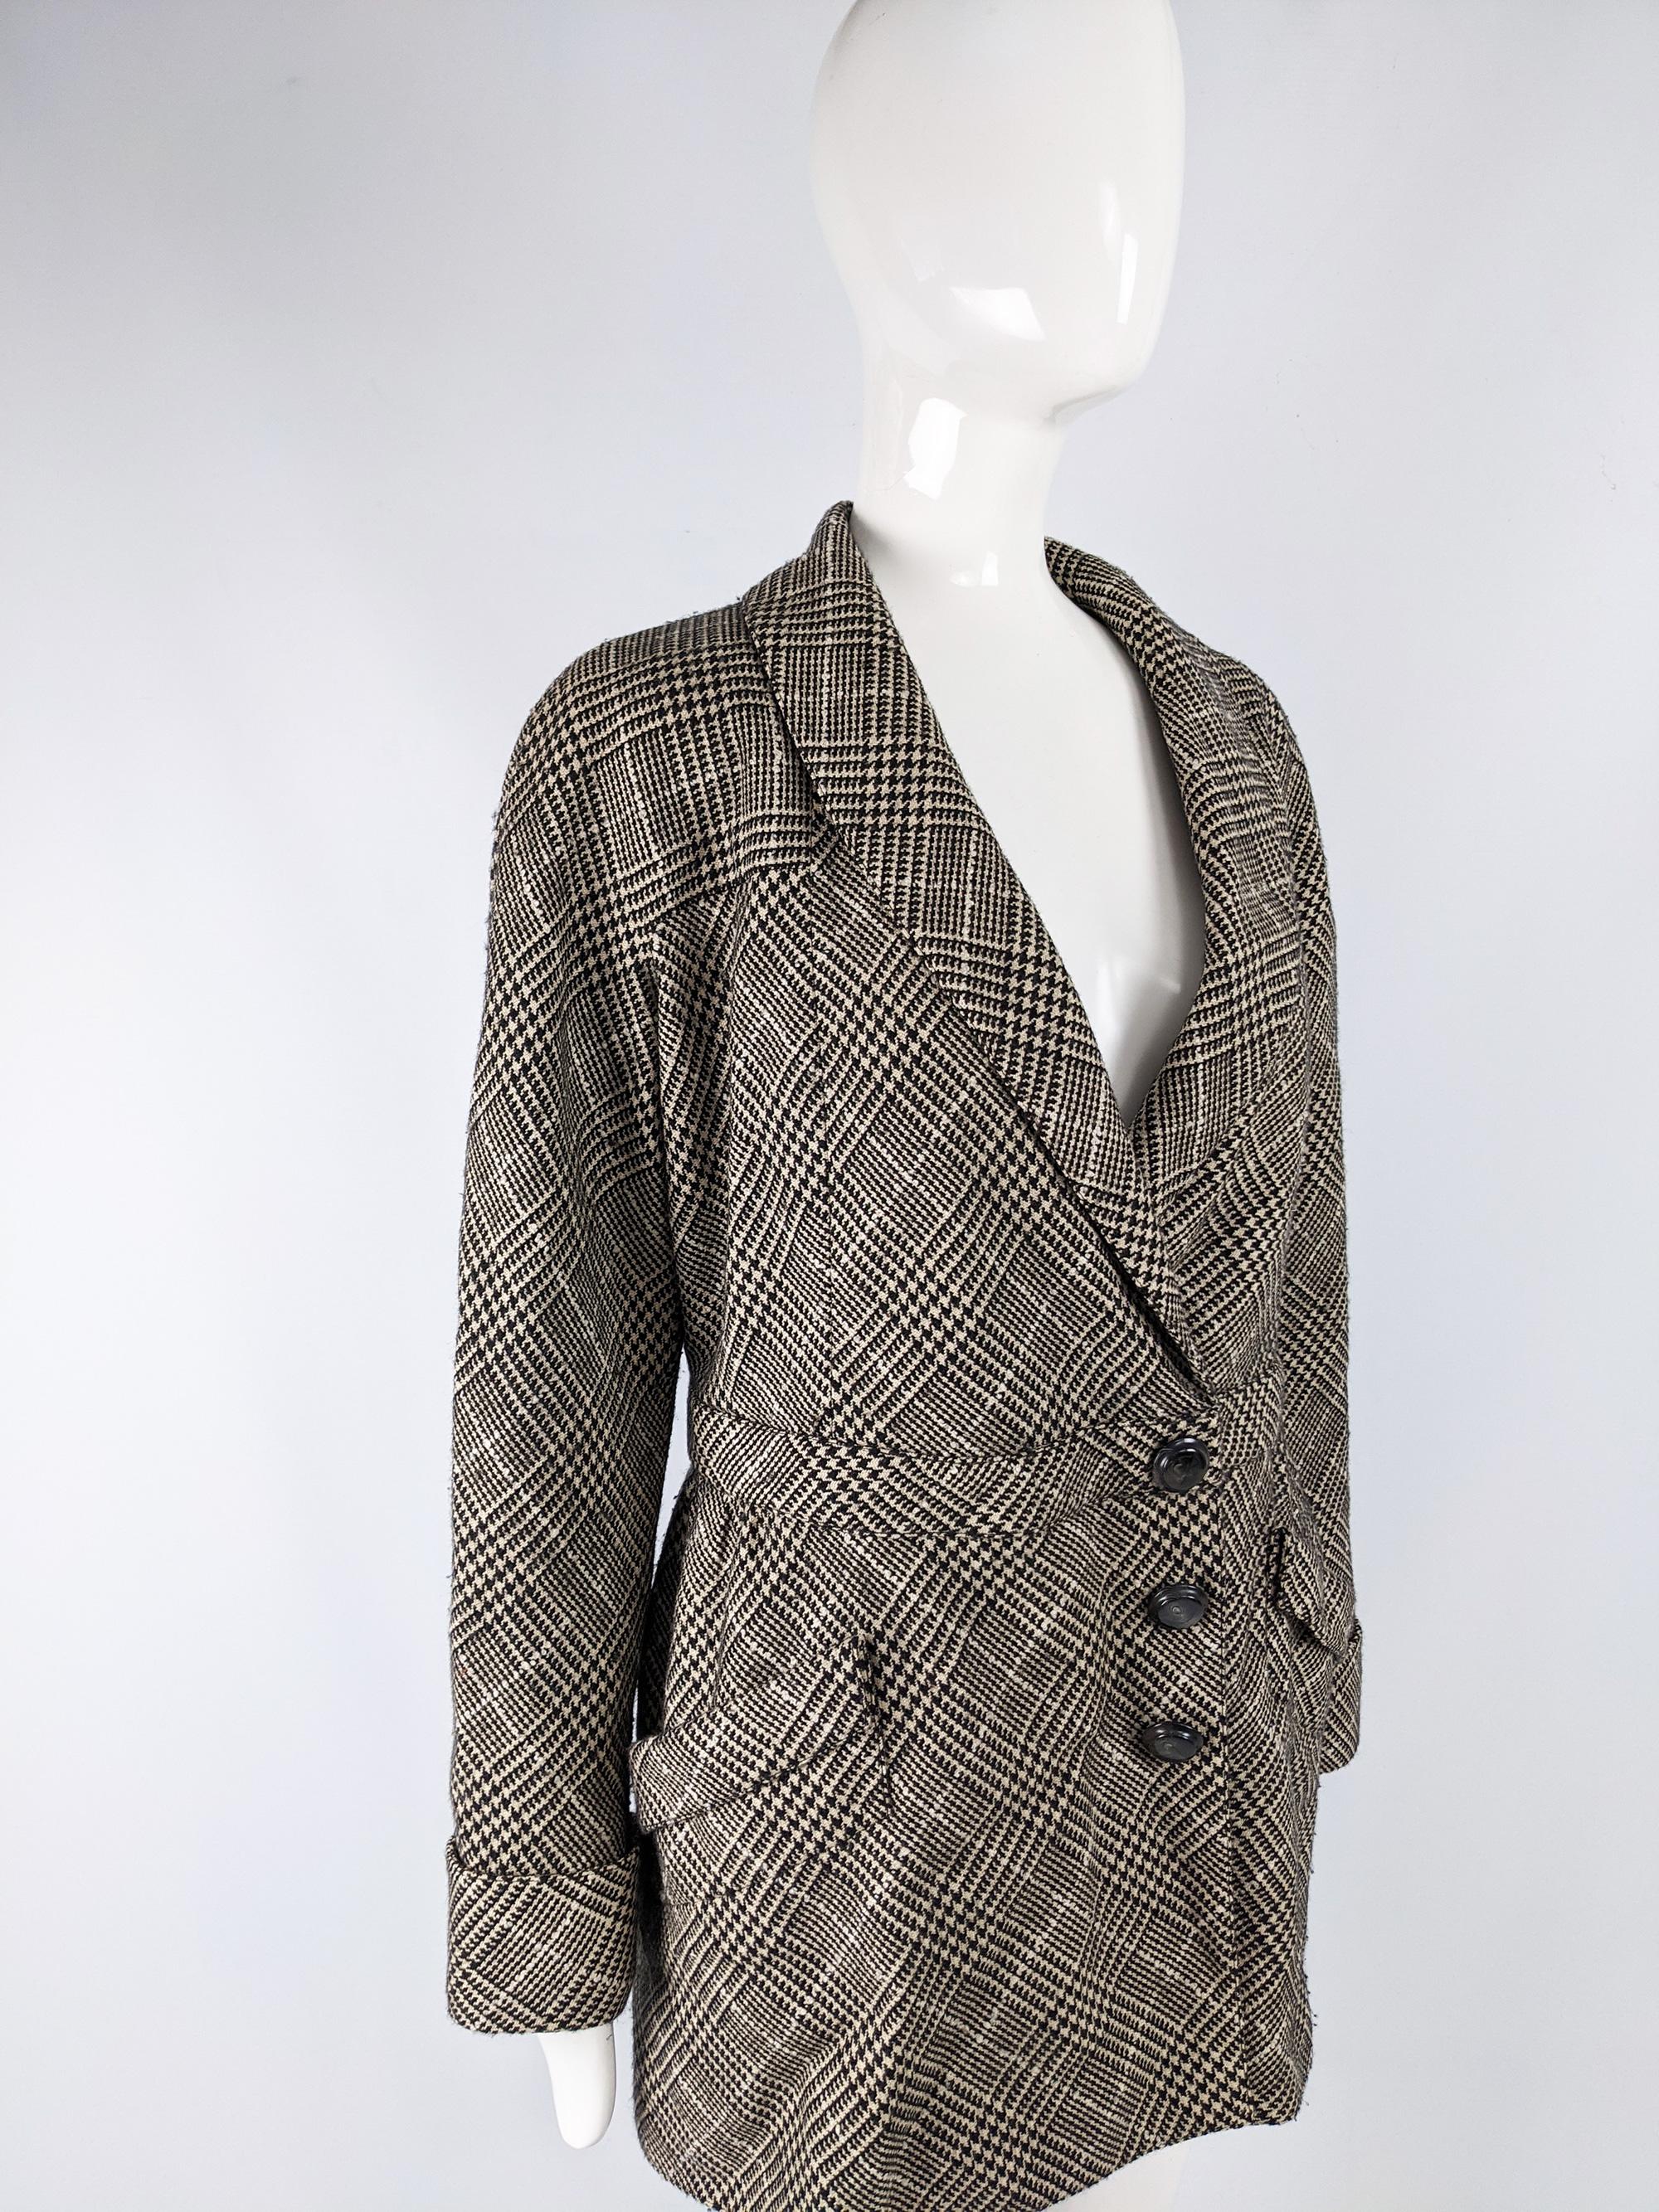 A chic and rare vintage womens Valentino jacket from the 80s. In a houndstooth checked wool and cashmere fabric. It has a nipped waist and a shawl collar that gives it a sophisticated look for day or evening. 

Size: Marked vintage 14 but fits like